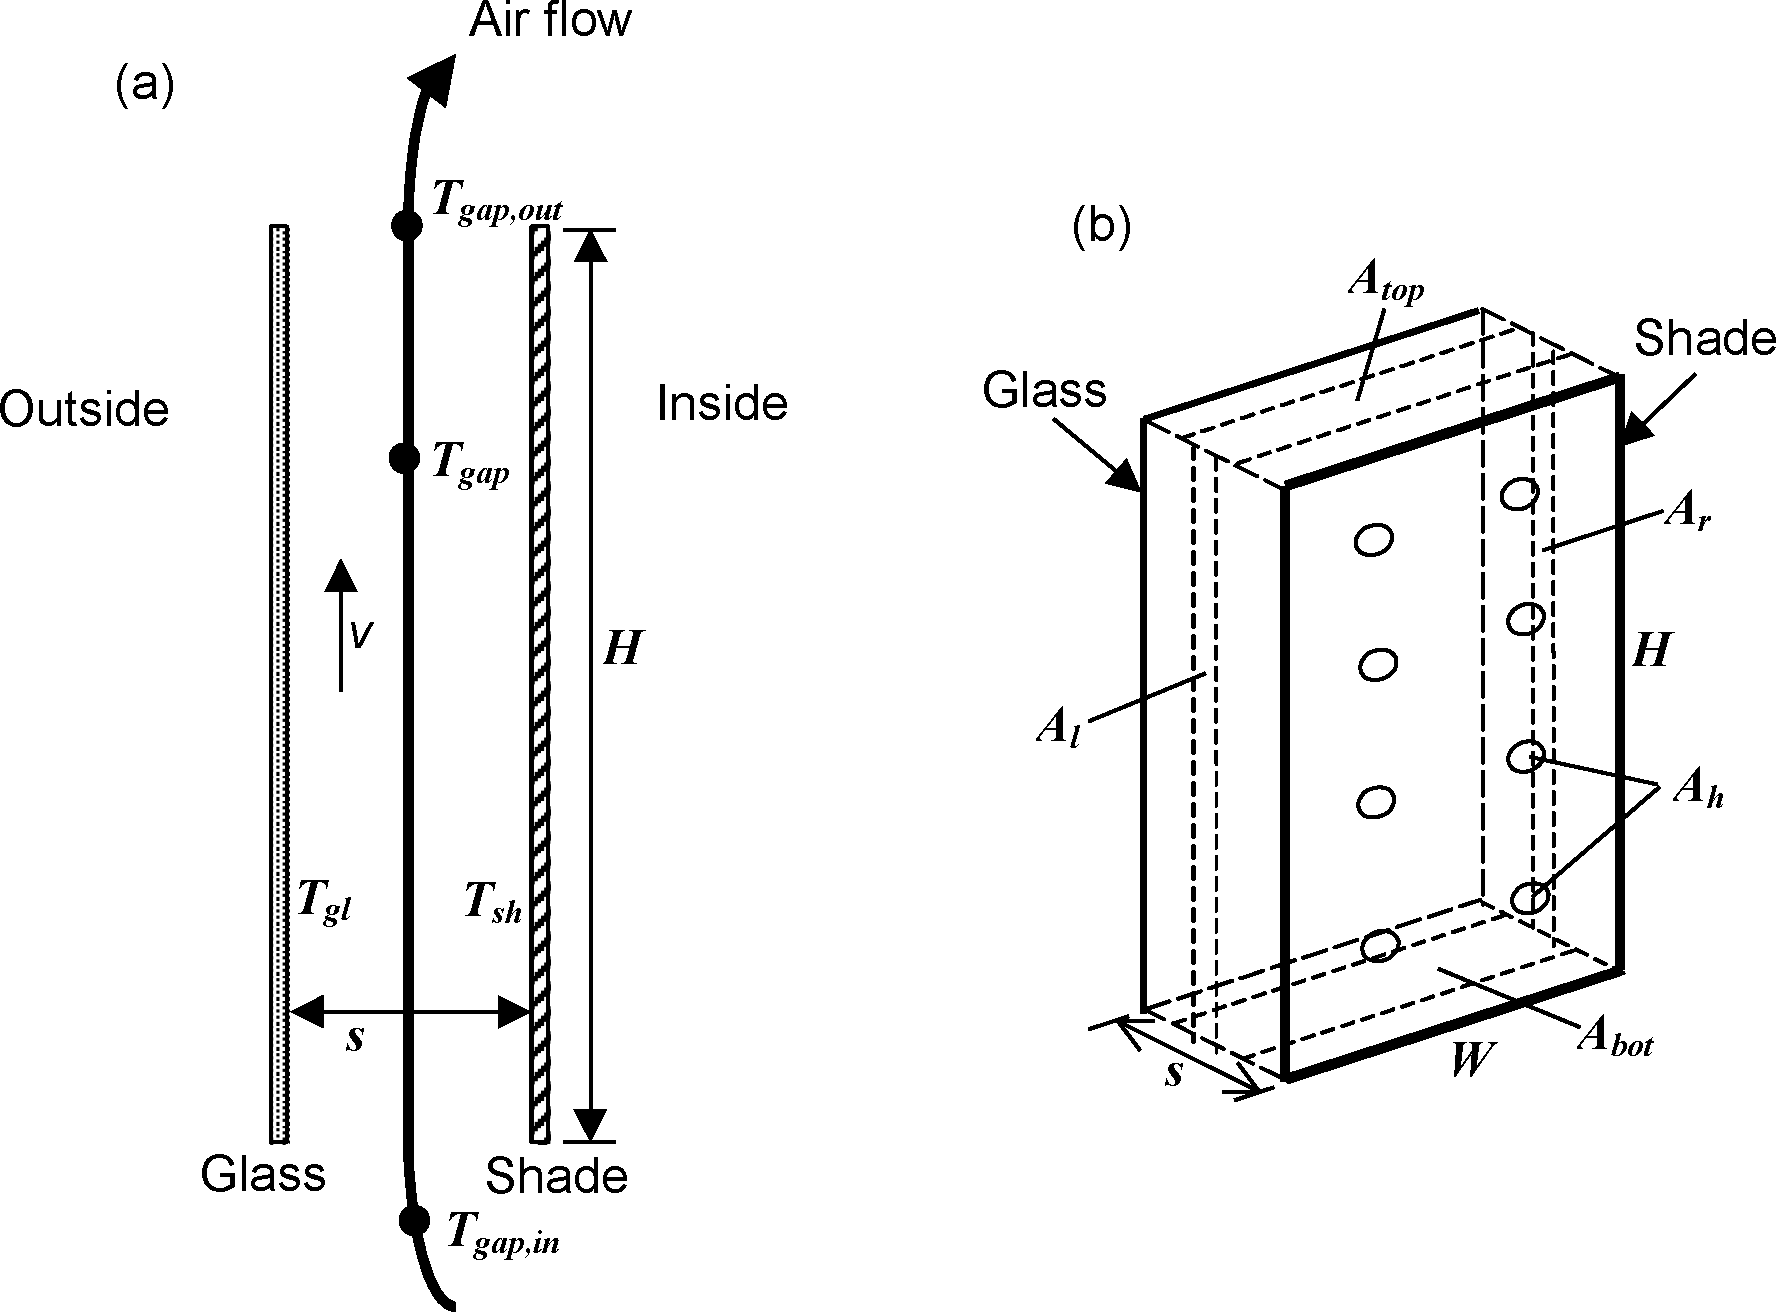 Vertical section (a) and perspective view (b) of glass layer and interior shading layer showing variables used in the gap airflow analysis. The opening areas A_{bot}, A_{top}, A_{l}, A_{r} and A_{h} are shown schematically.